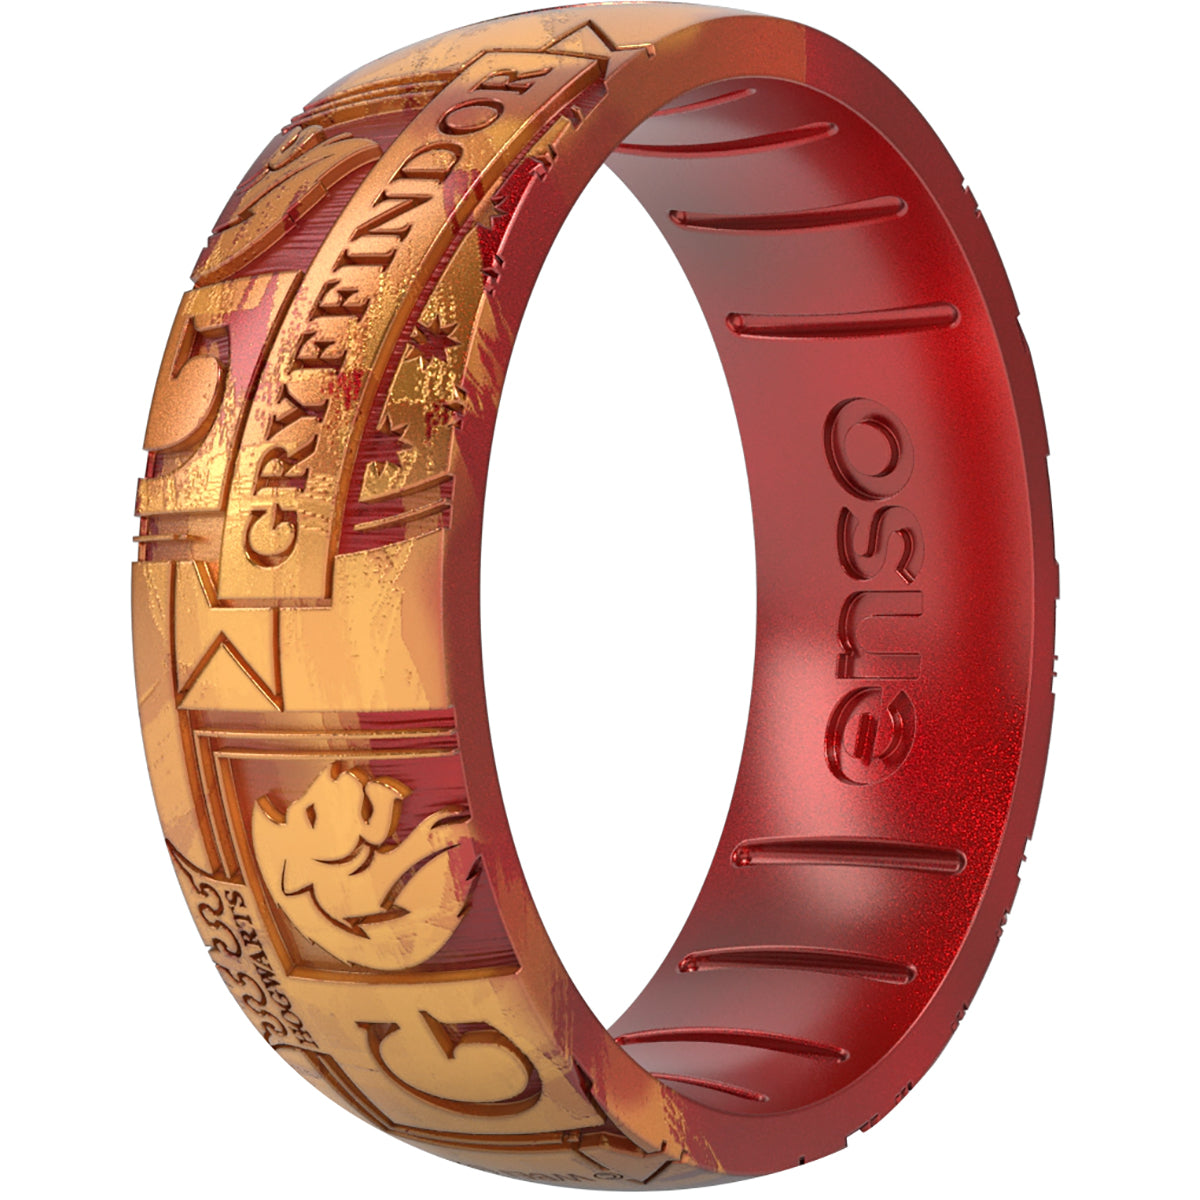 Enso Rings Harry Potter Gryffindor Classic Silicone Ring Enso Rings